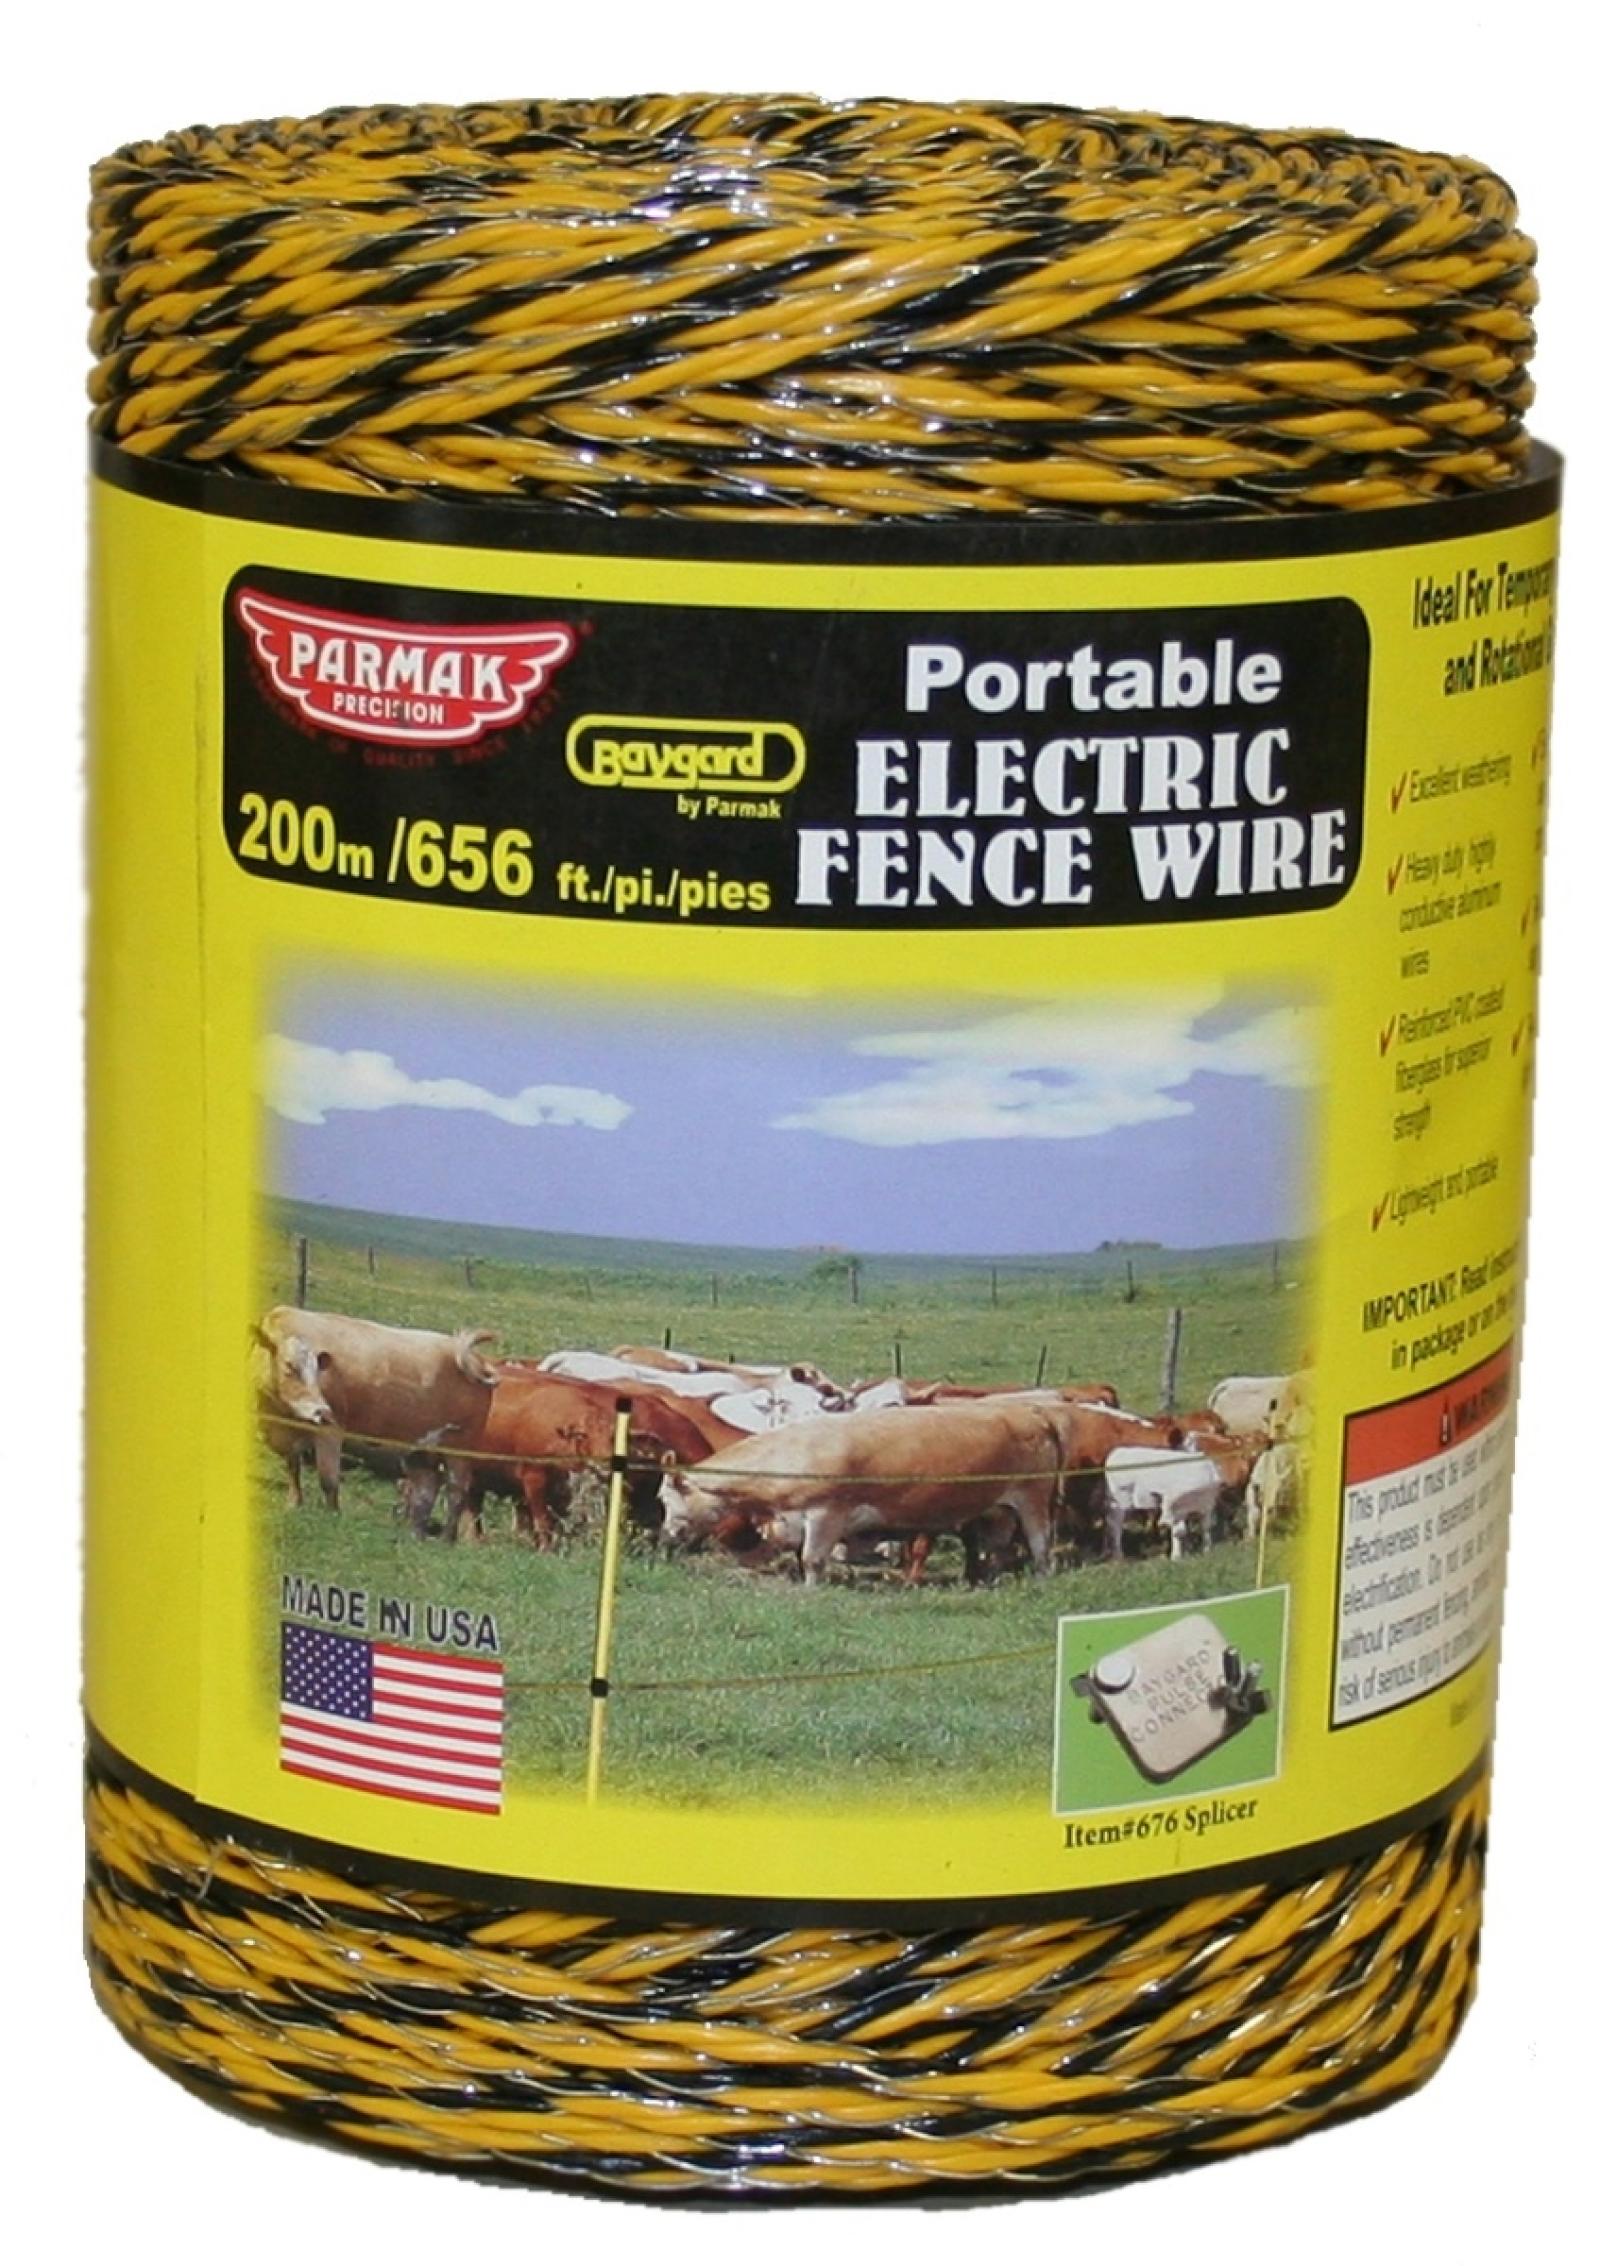 Parmak Baygard Electric Fence Wire 200m/656ft